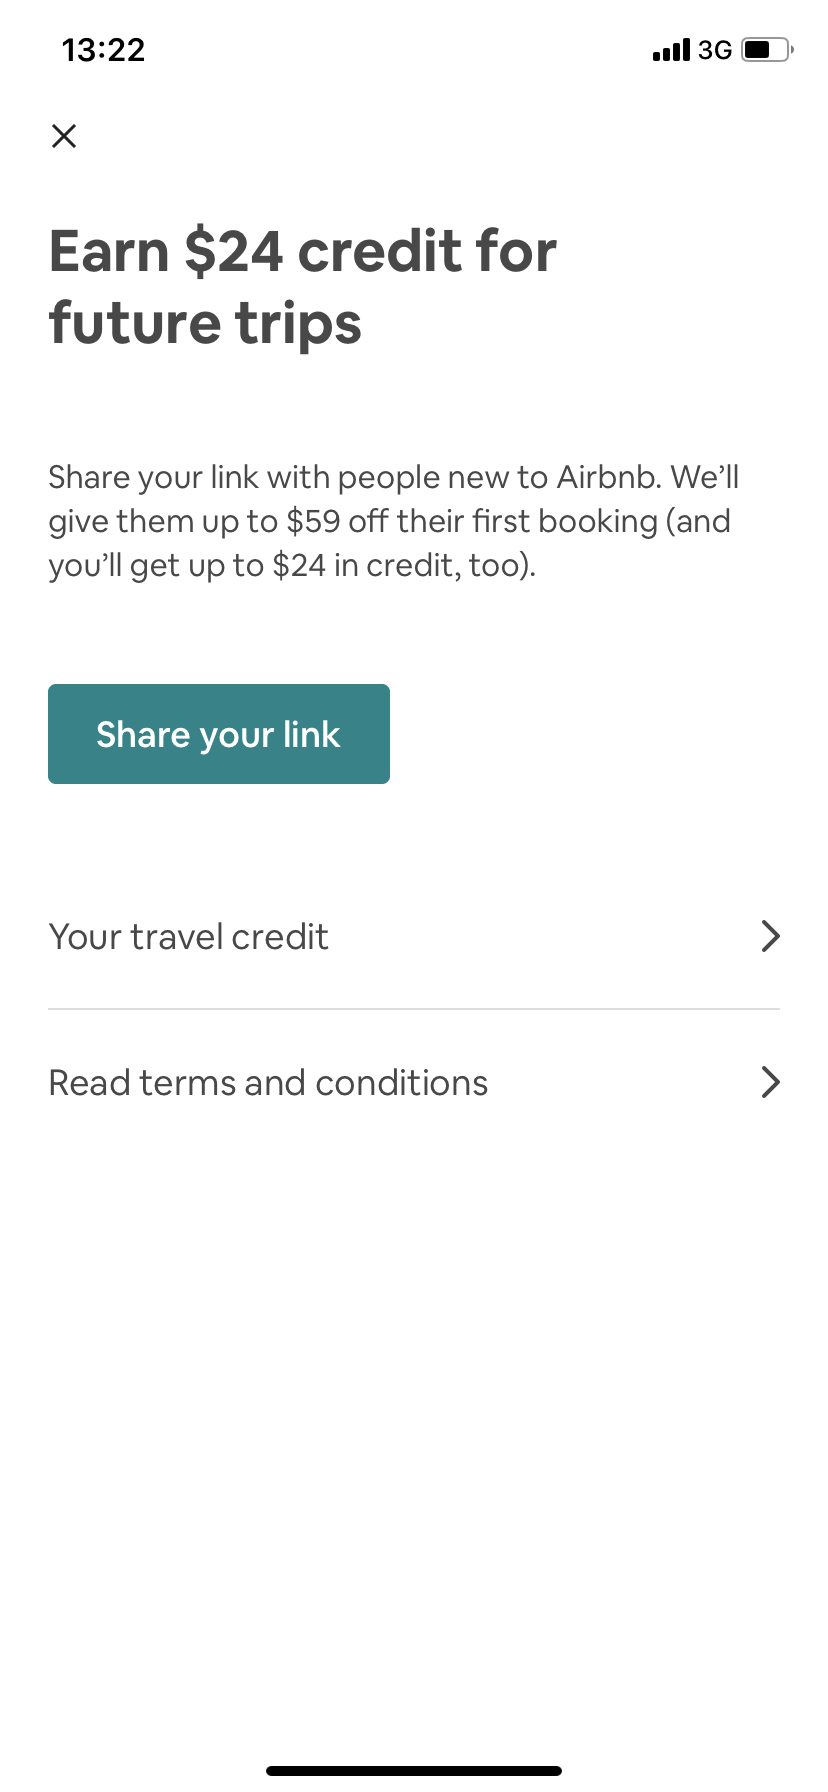 Airbnb uses a referral program to promote their mobile app
 
